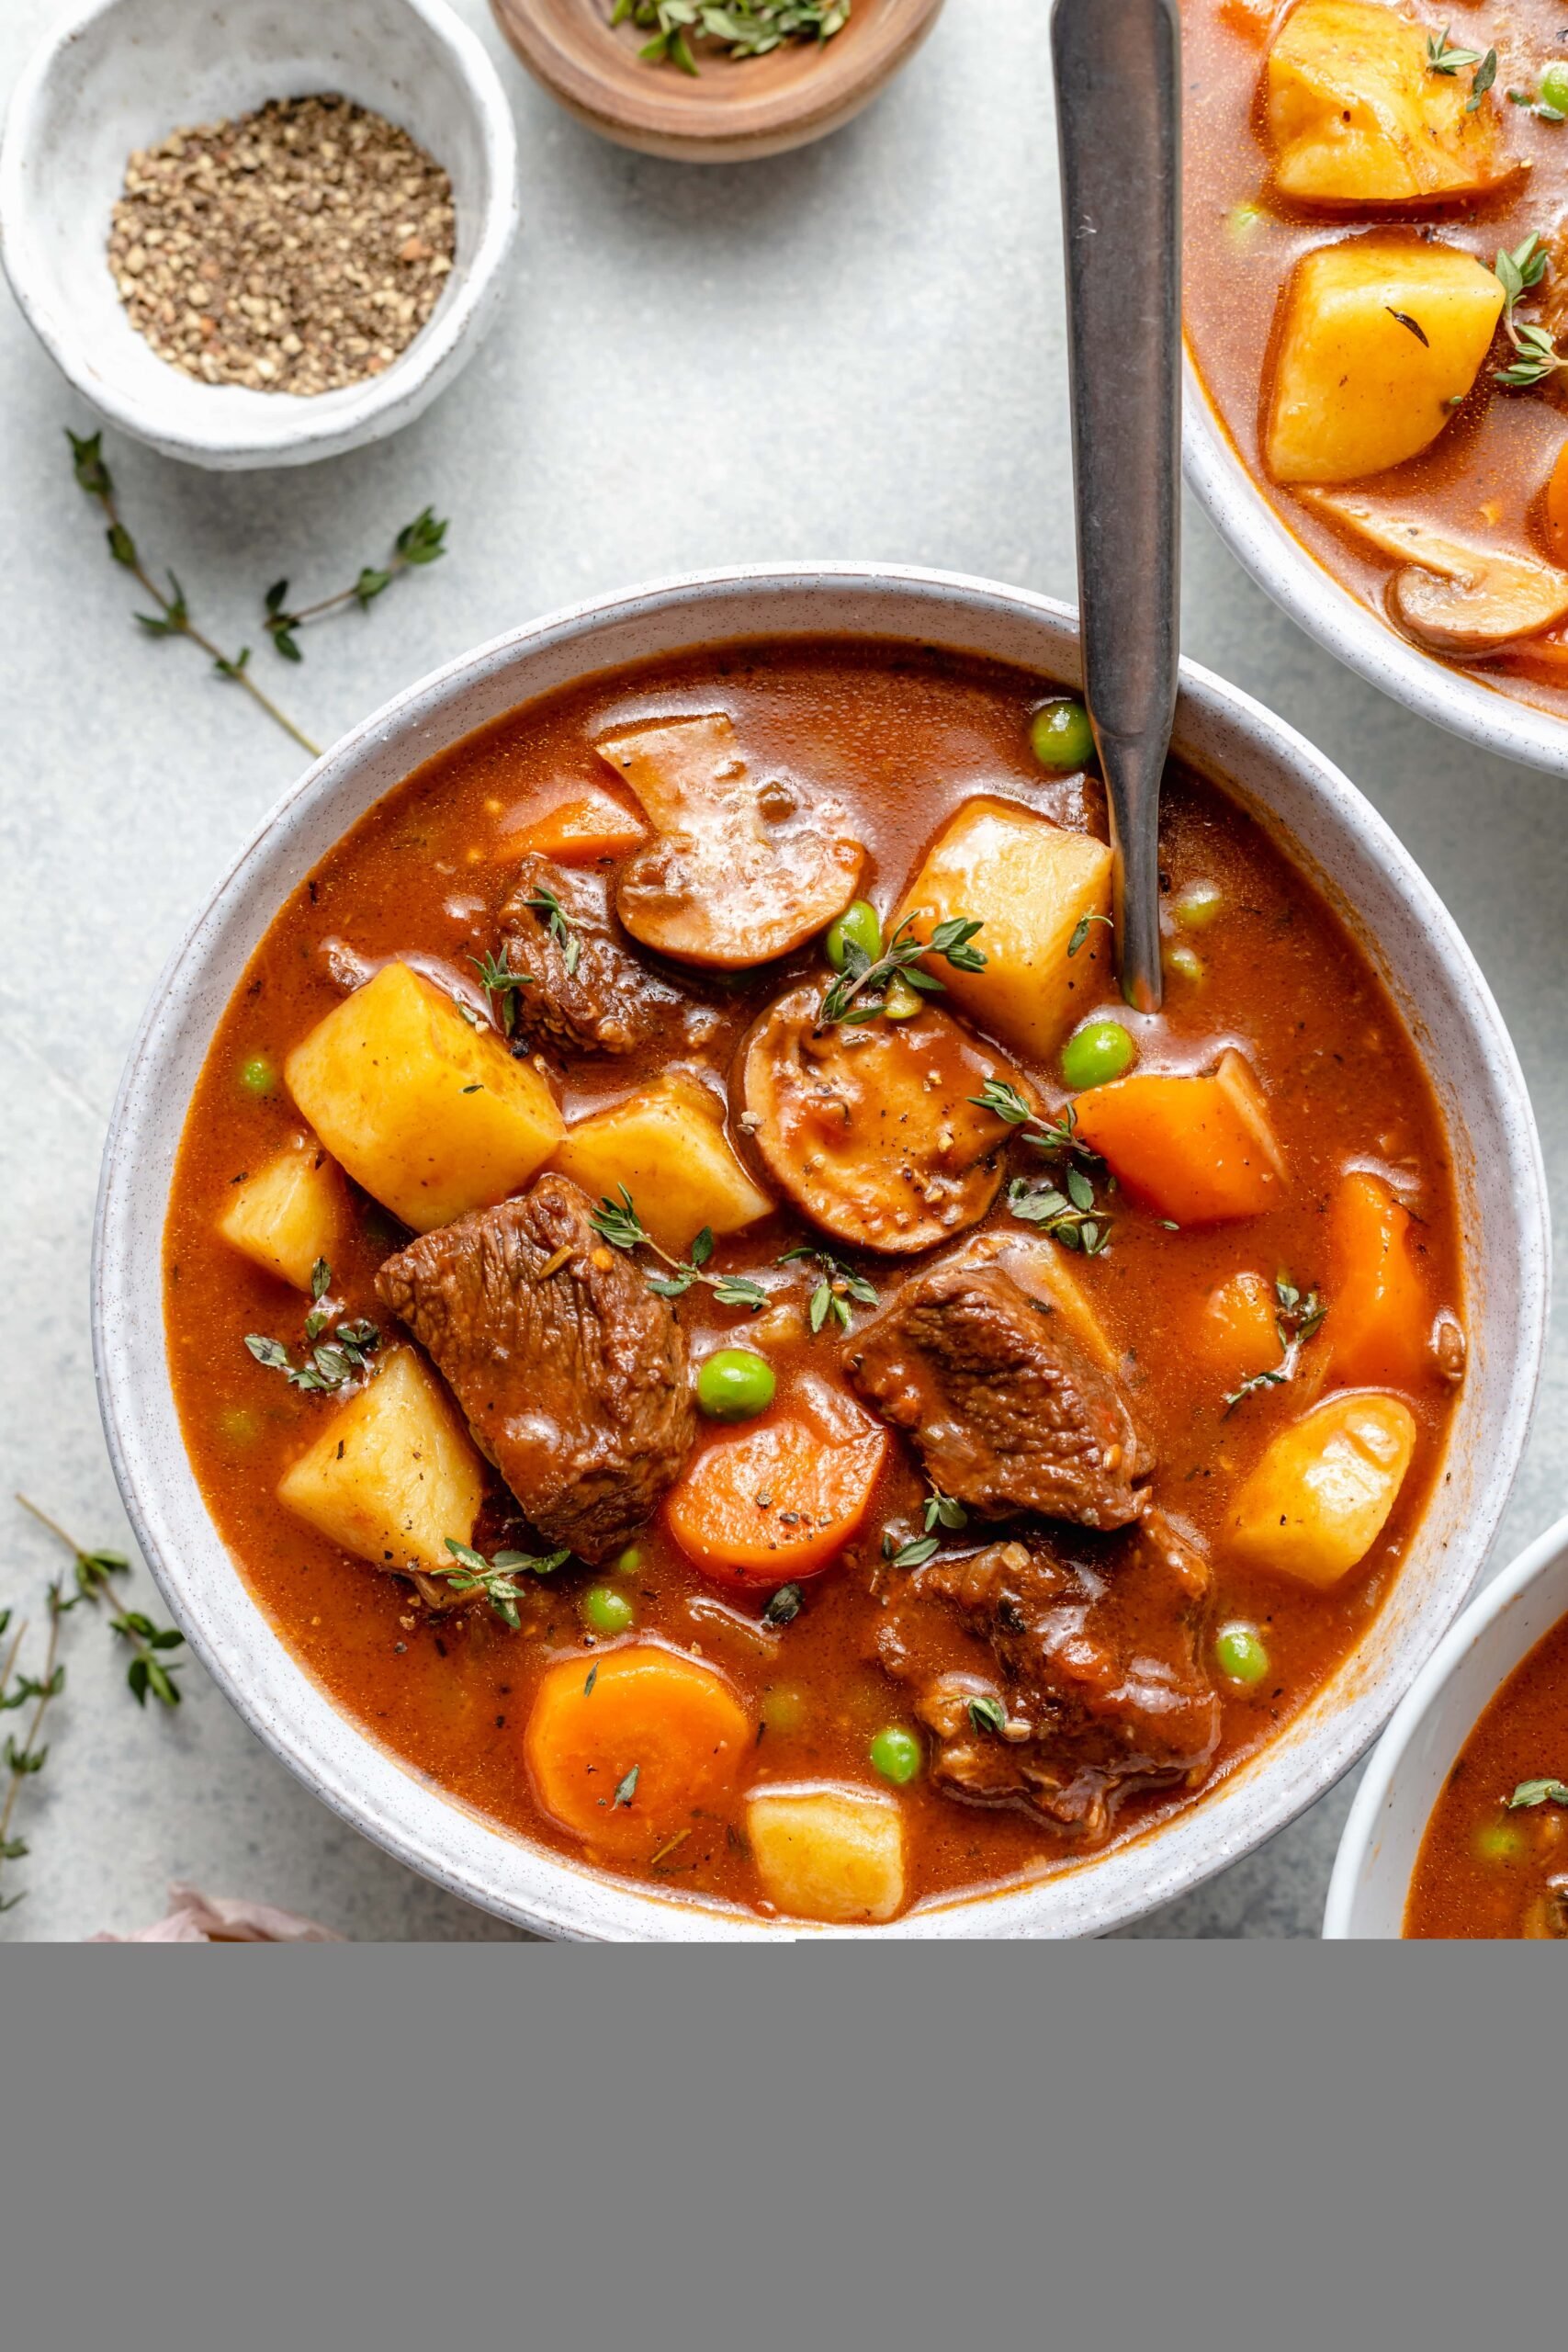 https://allthehealthythings.com/wp-content/uploads/2019/11/Beef-Stew-5-scaled.jpg